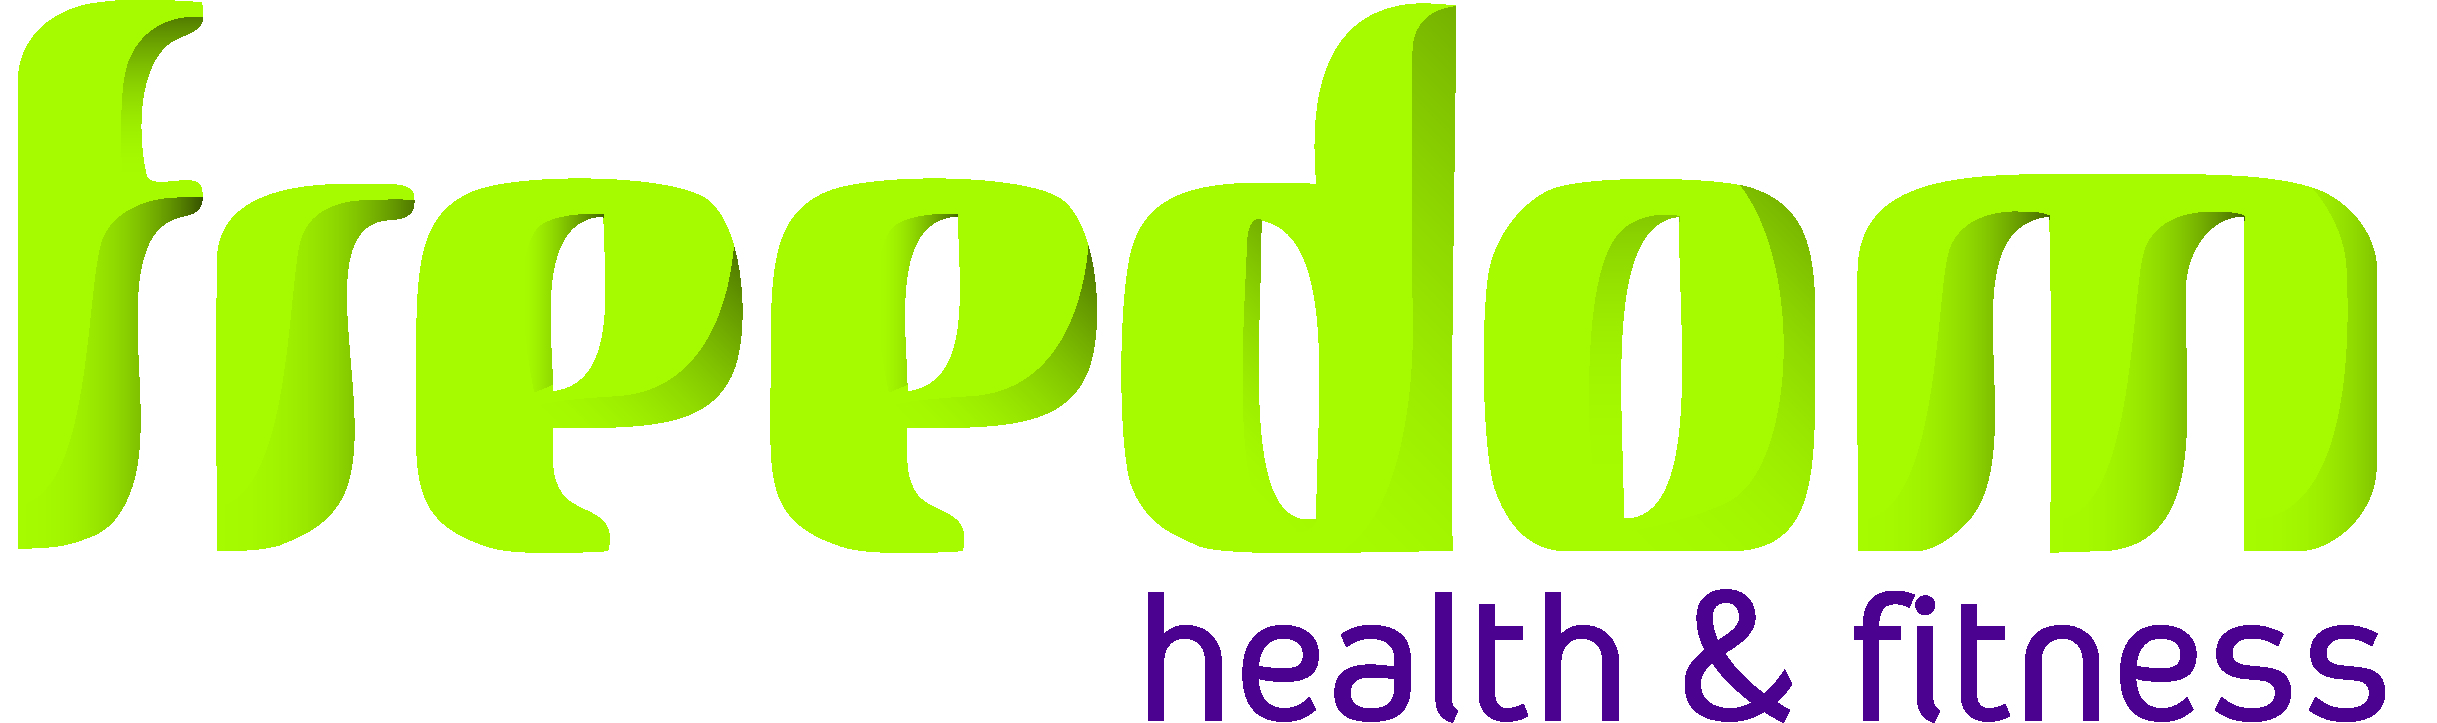 Freedom Health and Fitness